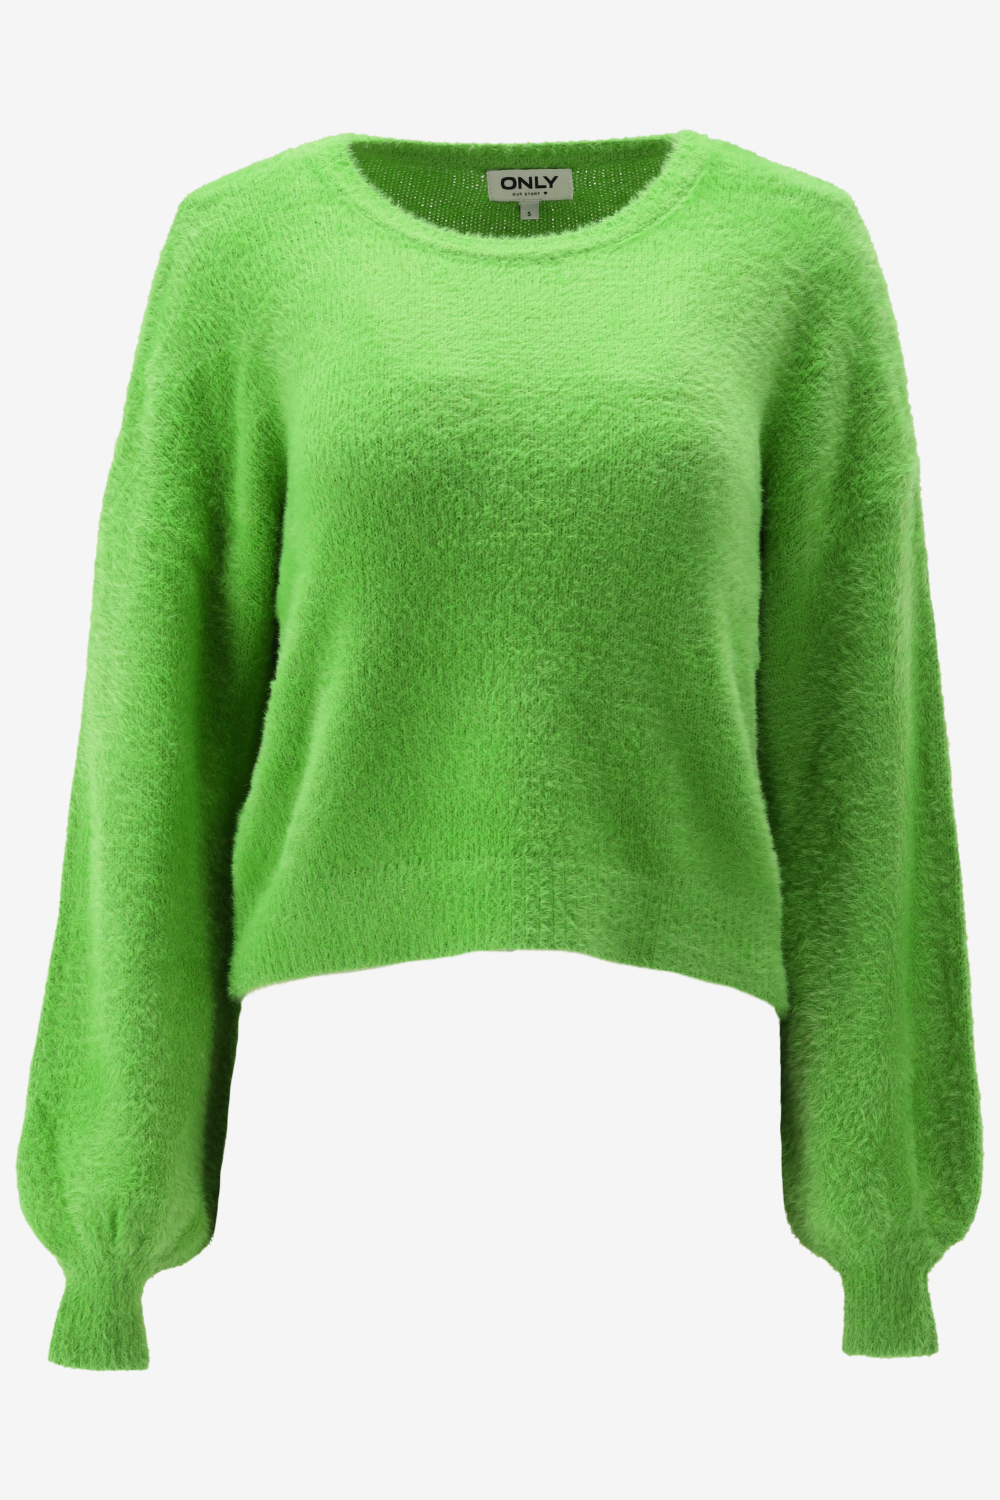 Only Piumo L/s Pullover Island Green GROEN L